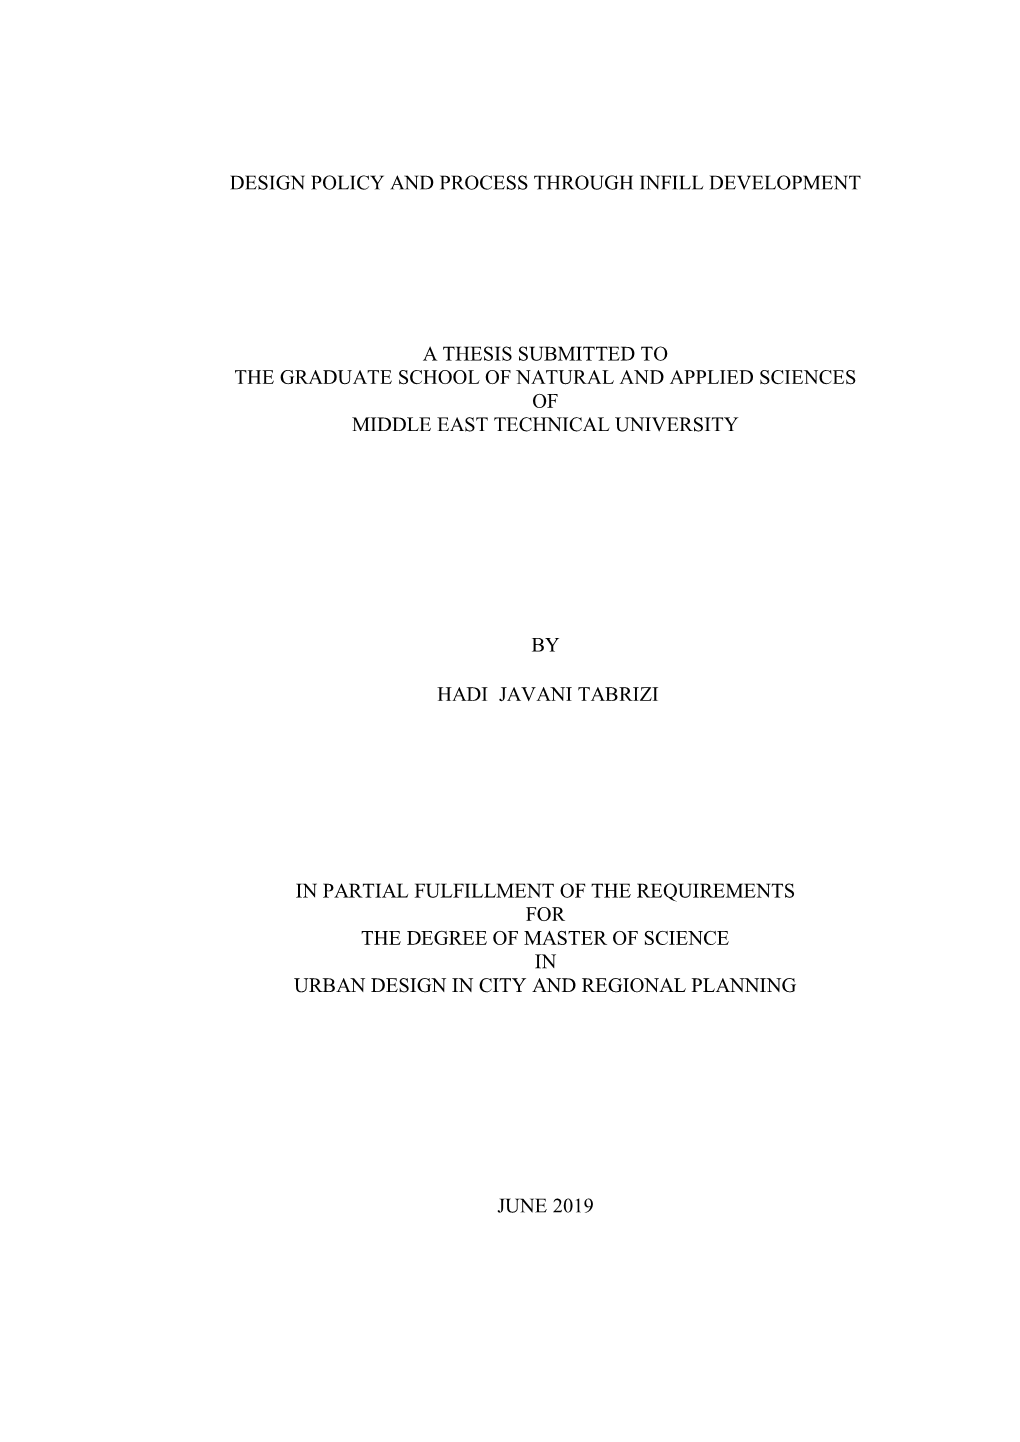 Design Policy and Process Through Infill Development a Thesis Submitted to the Graduate School of Natural and Applied Sciences O